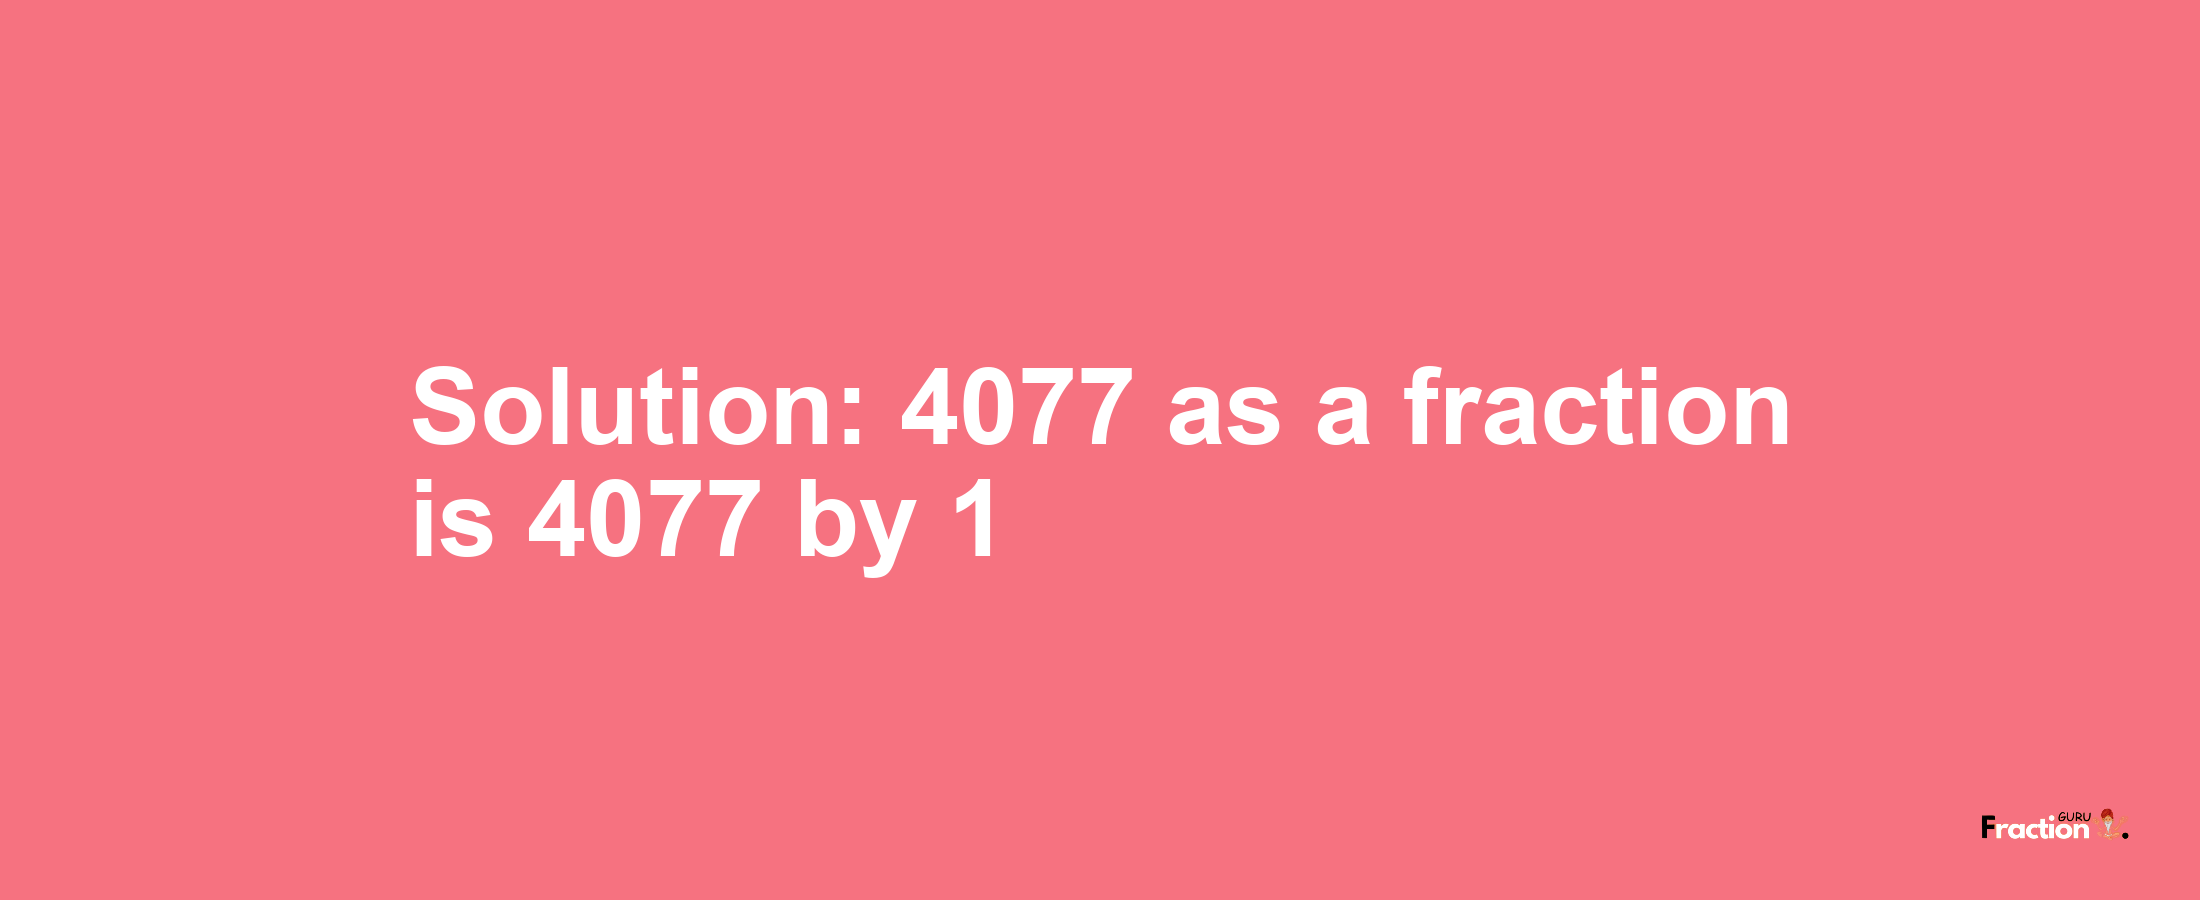 Solution:4077 as a fraction is 4077/1